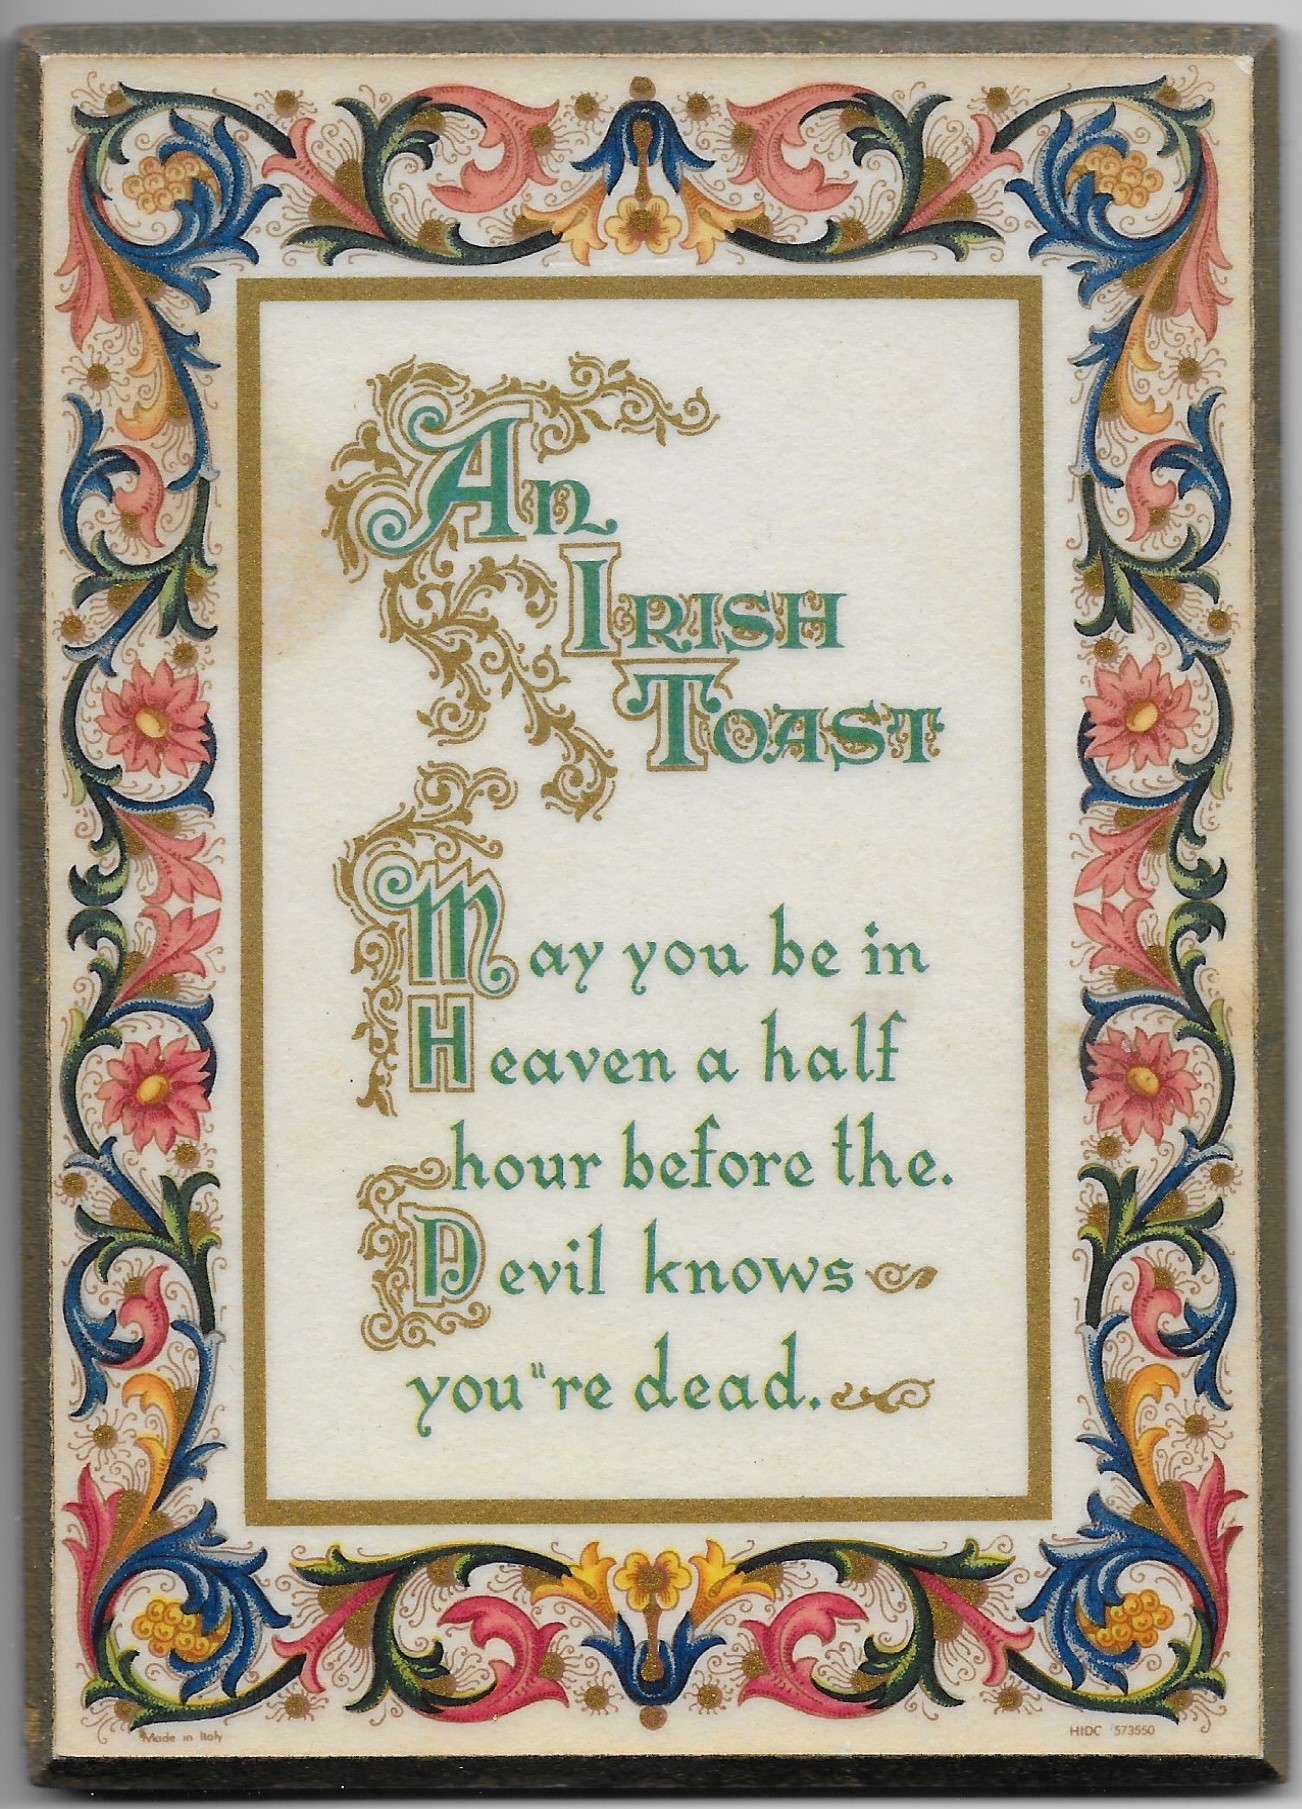 An Irish Toast: May you be in Heaven a half hour before the Devil knows you're dead.